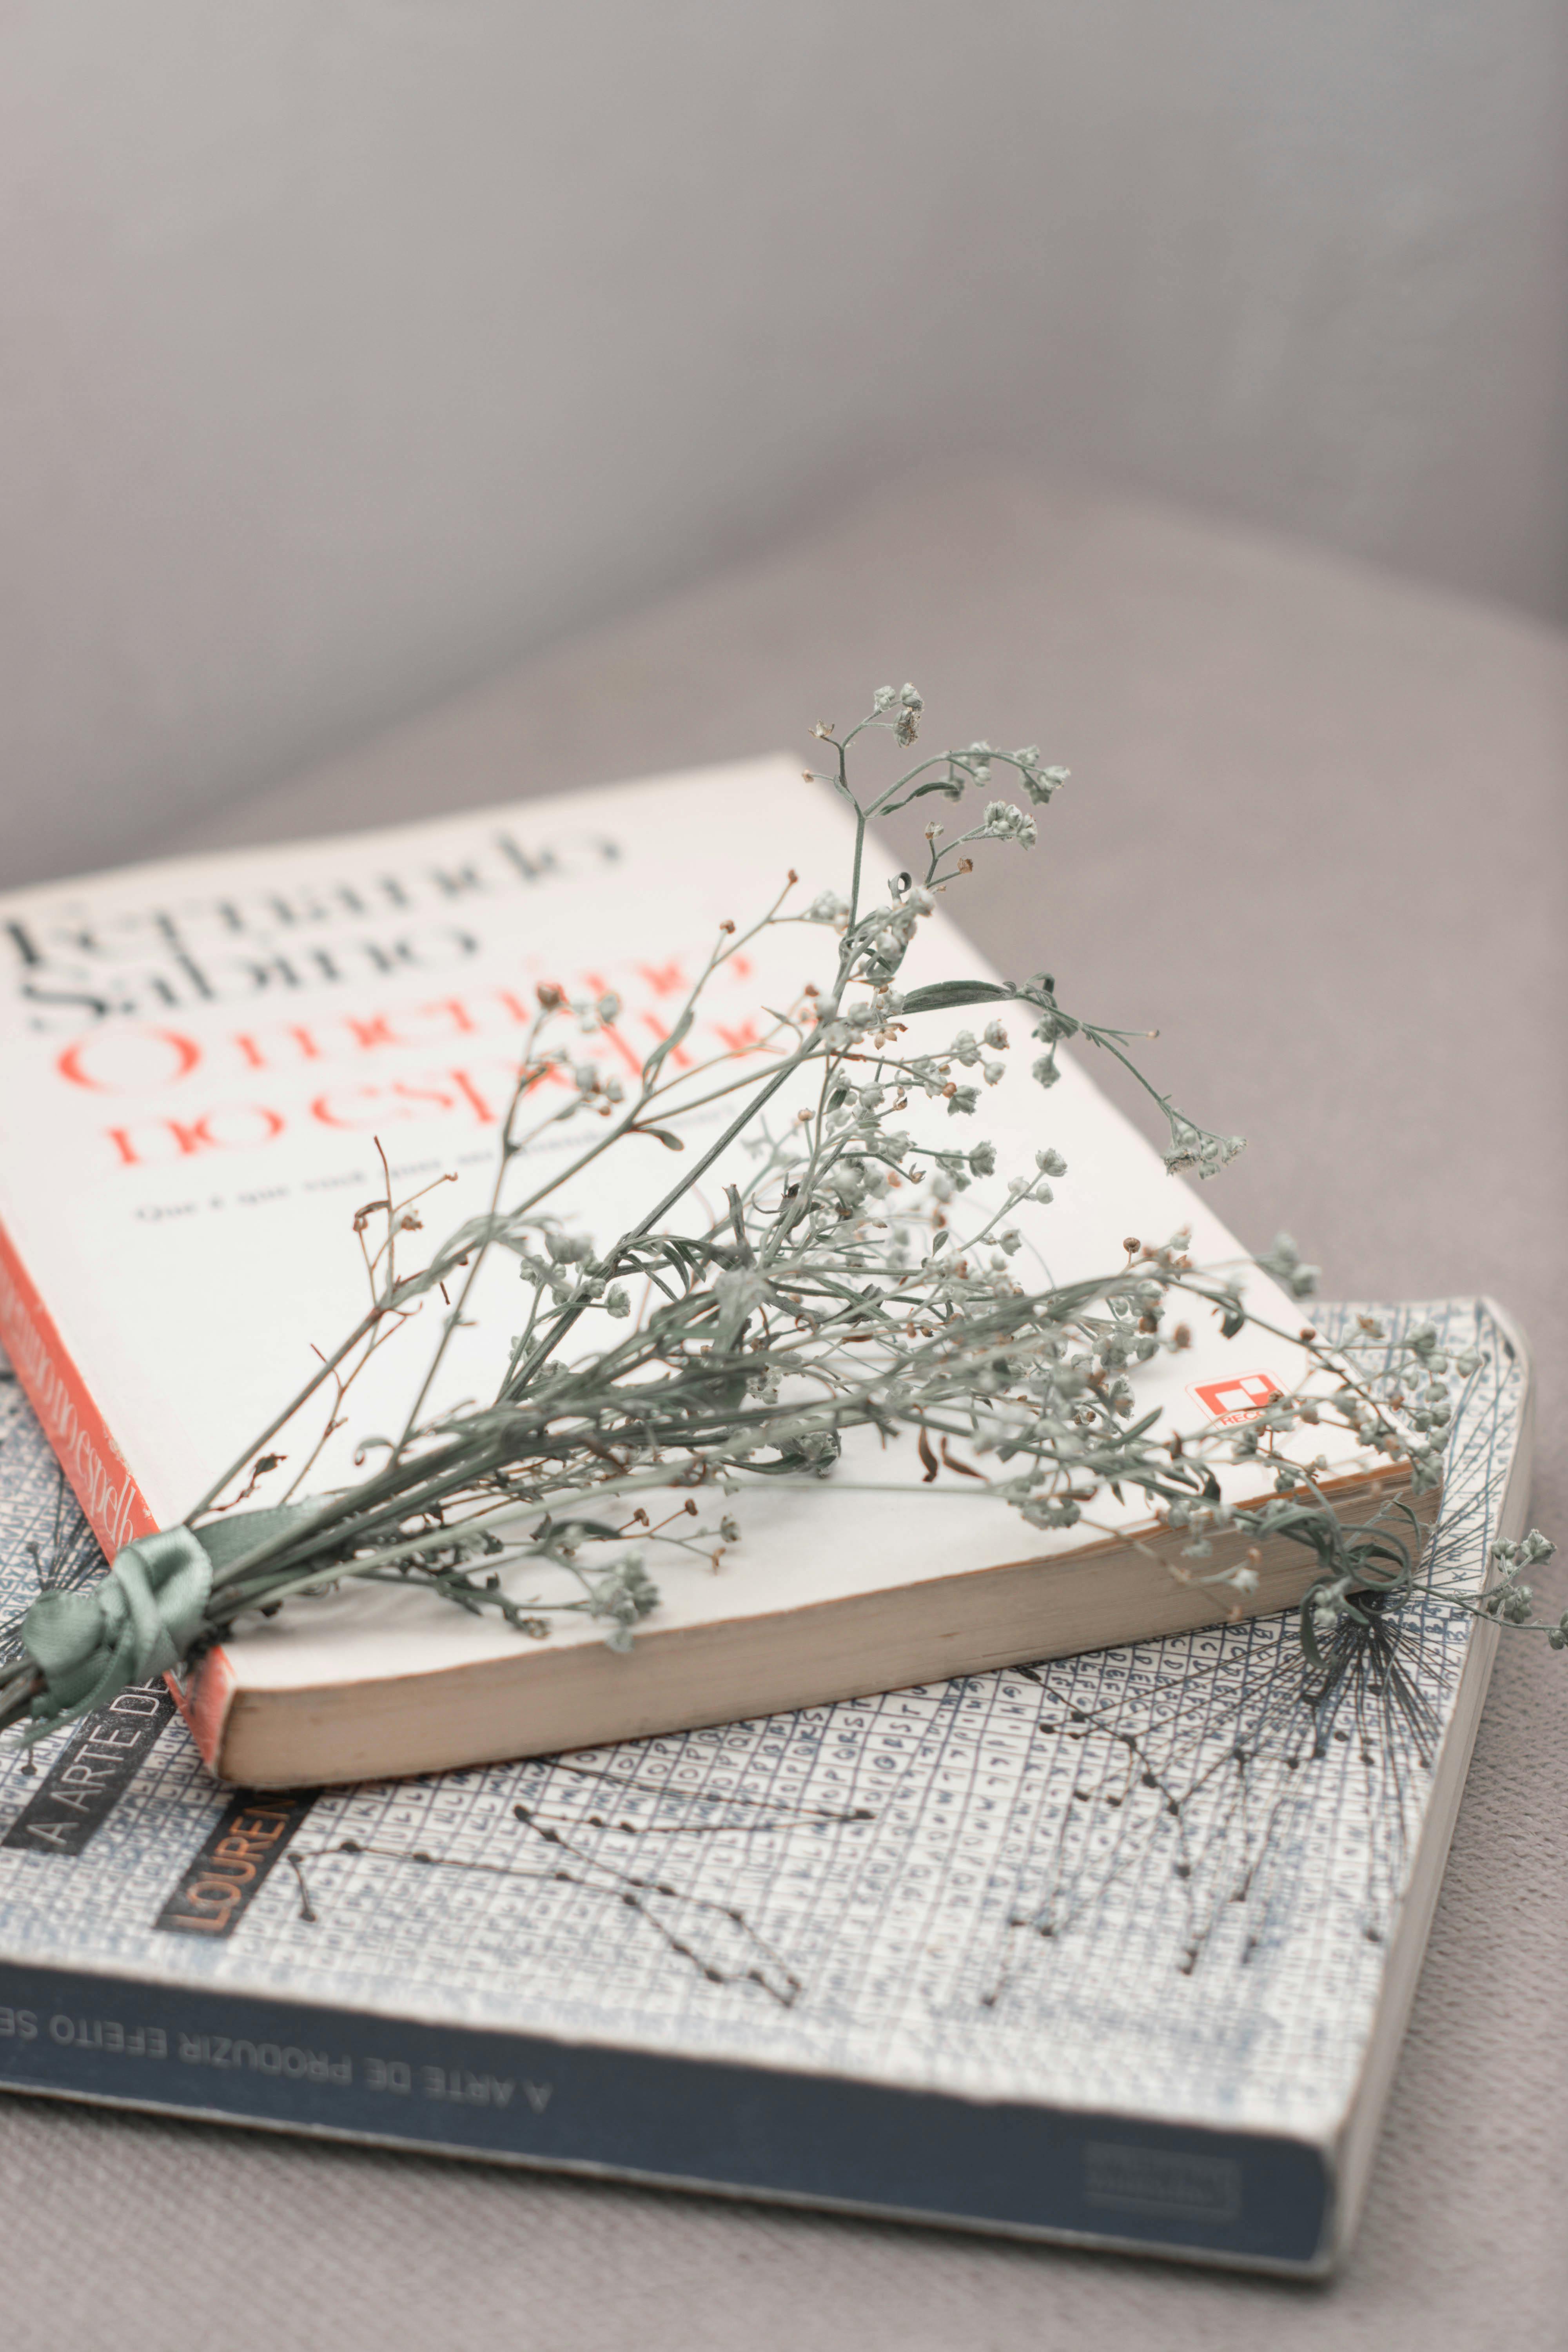 Small Flowers On A Book \u00b7 Free Stock Photo